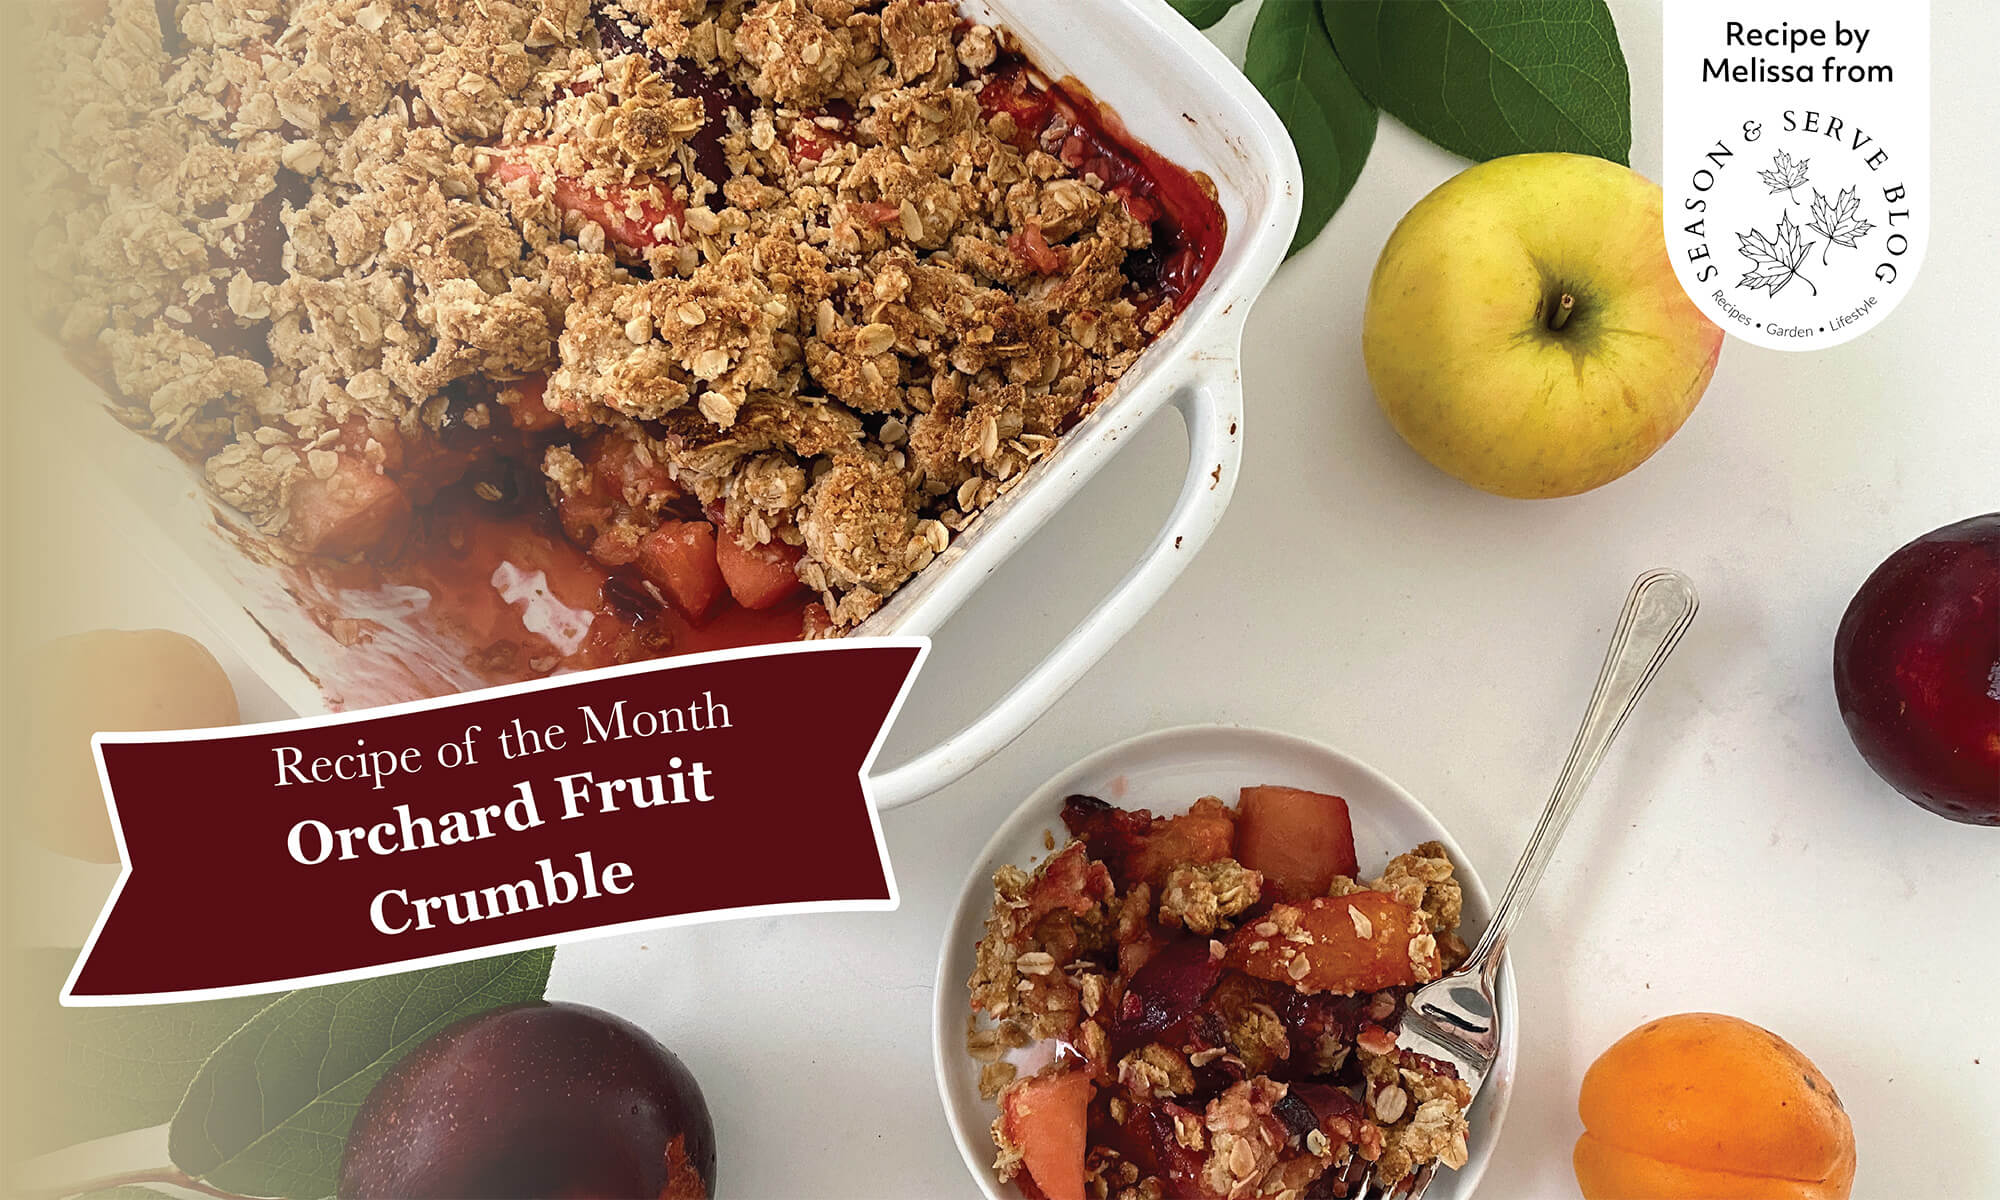 Recipe for Orchard Fruit Crumble This Orchard Fruit Crumble features summer stone fruits including plums and apricots along with autumnal apples, dried cranberries, and spices.